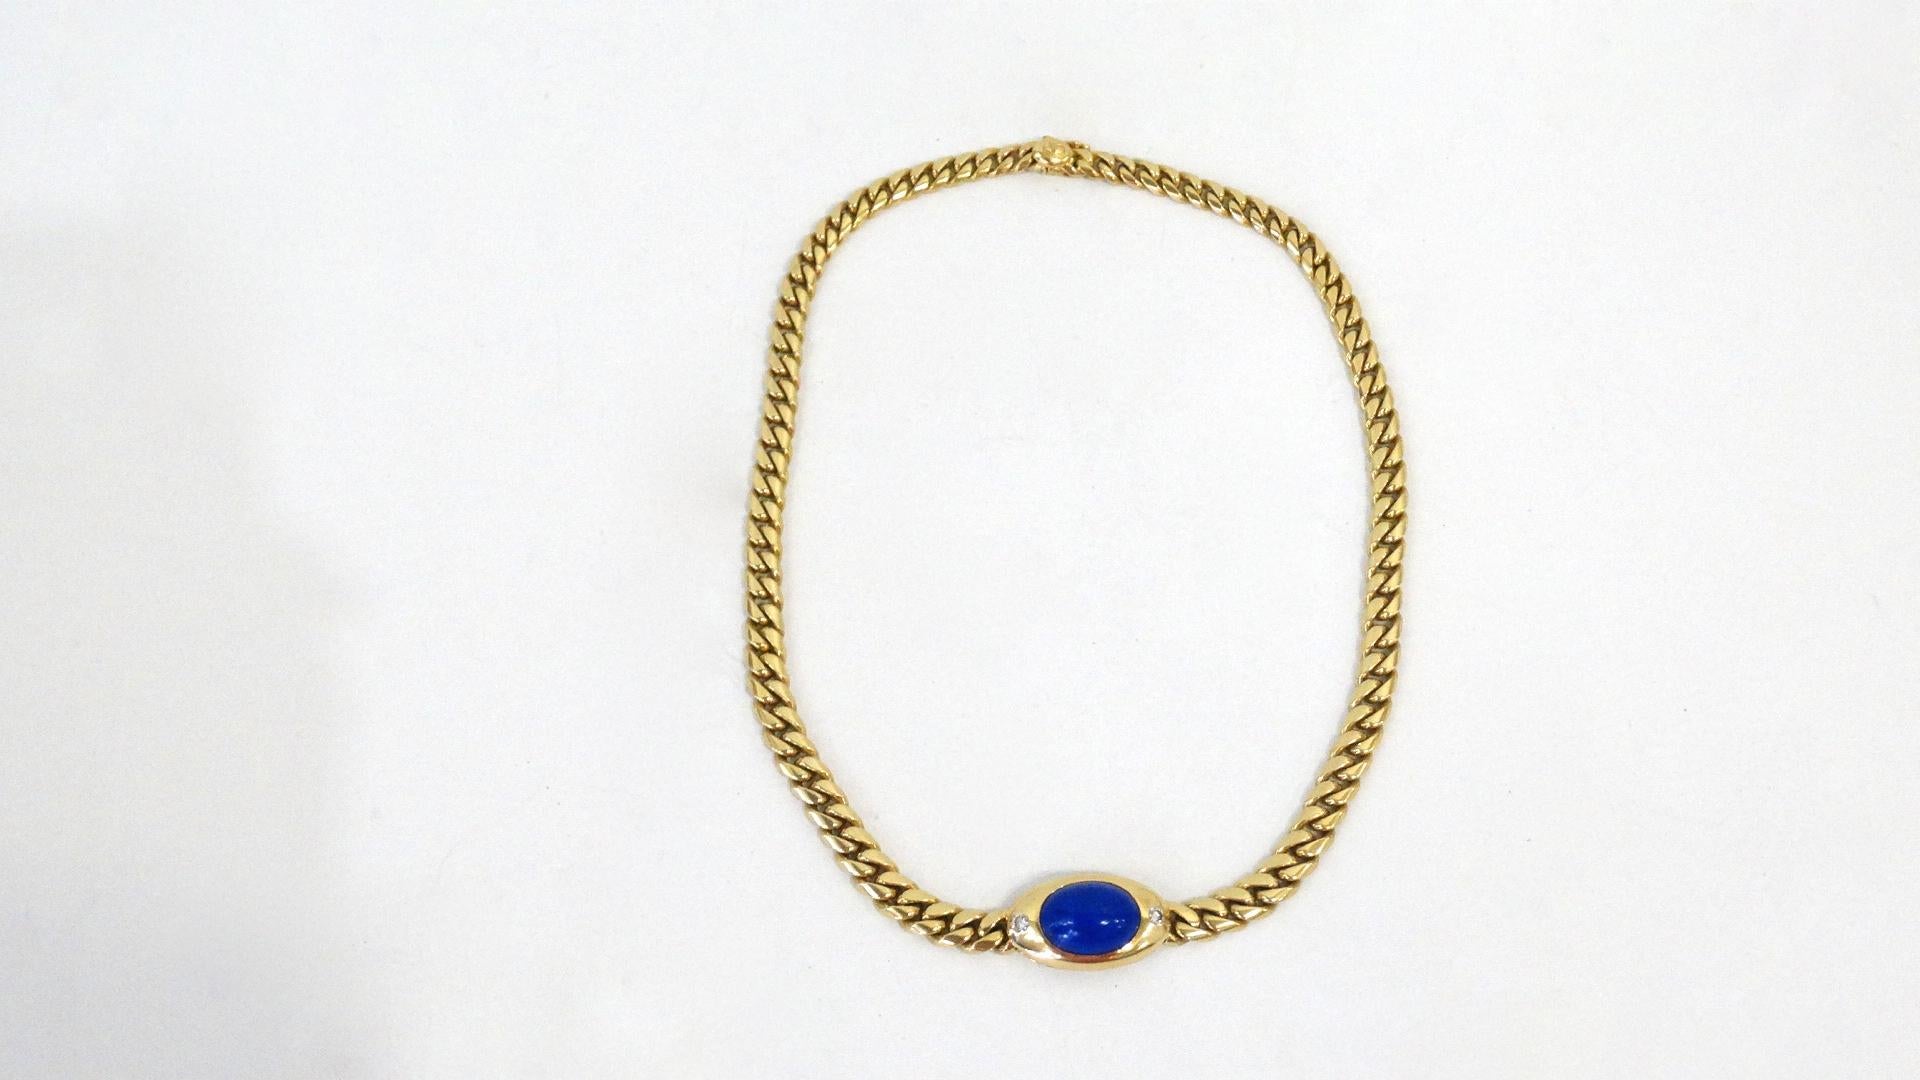 This rare and beautiful 1980s Bulgari 18k Gold chain link collar necklace features Lapis Lazuli oval stone with two White Diamonds on each side. Tested and signed 750 for 18k Gold and includes a French 